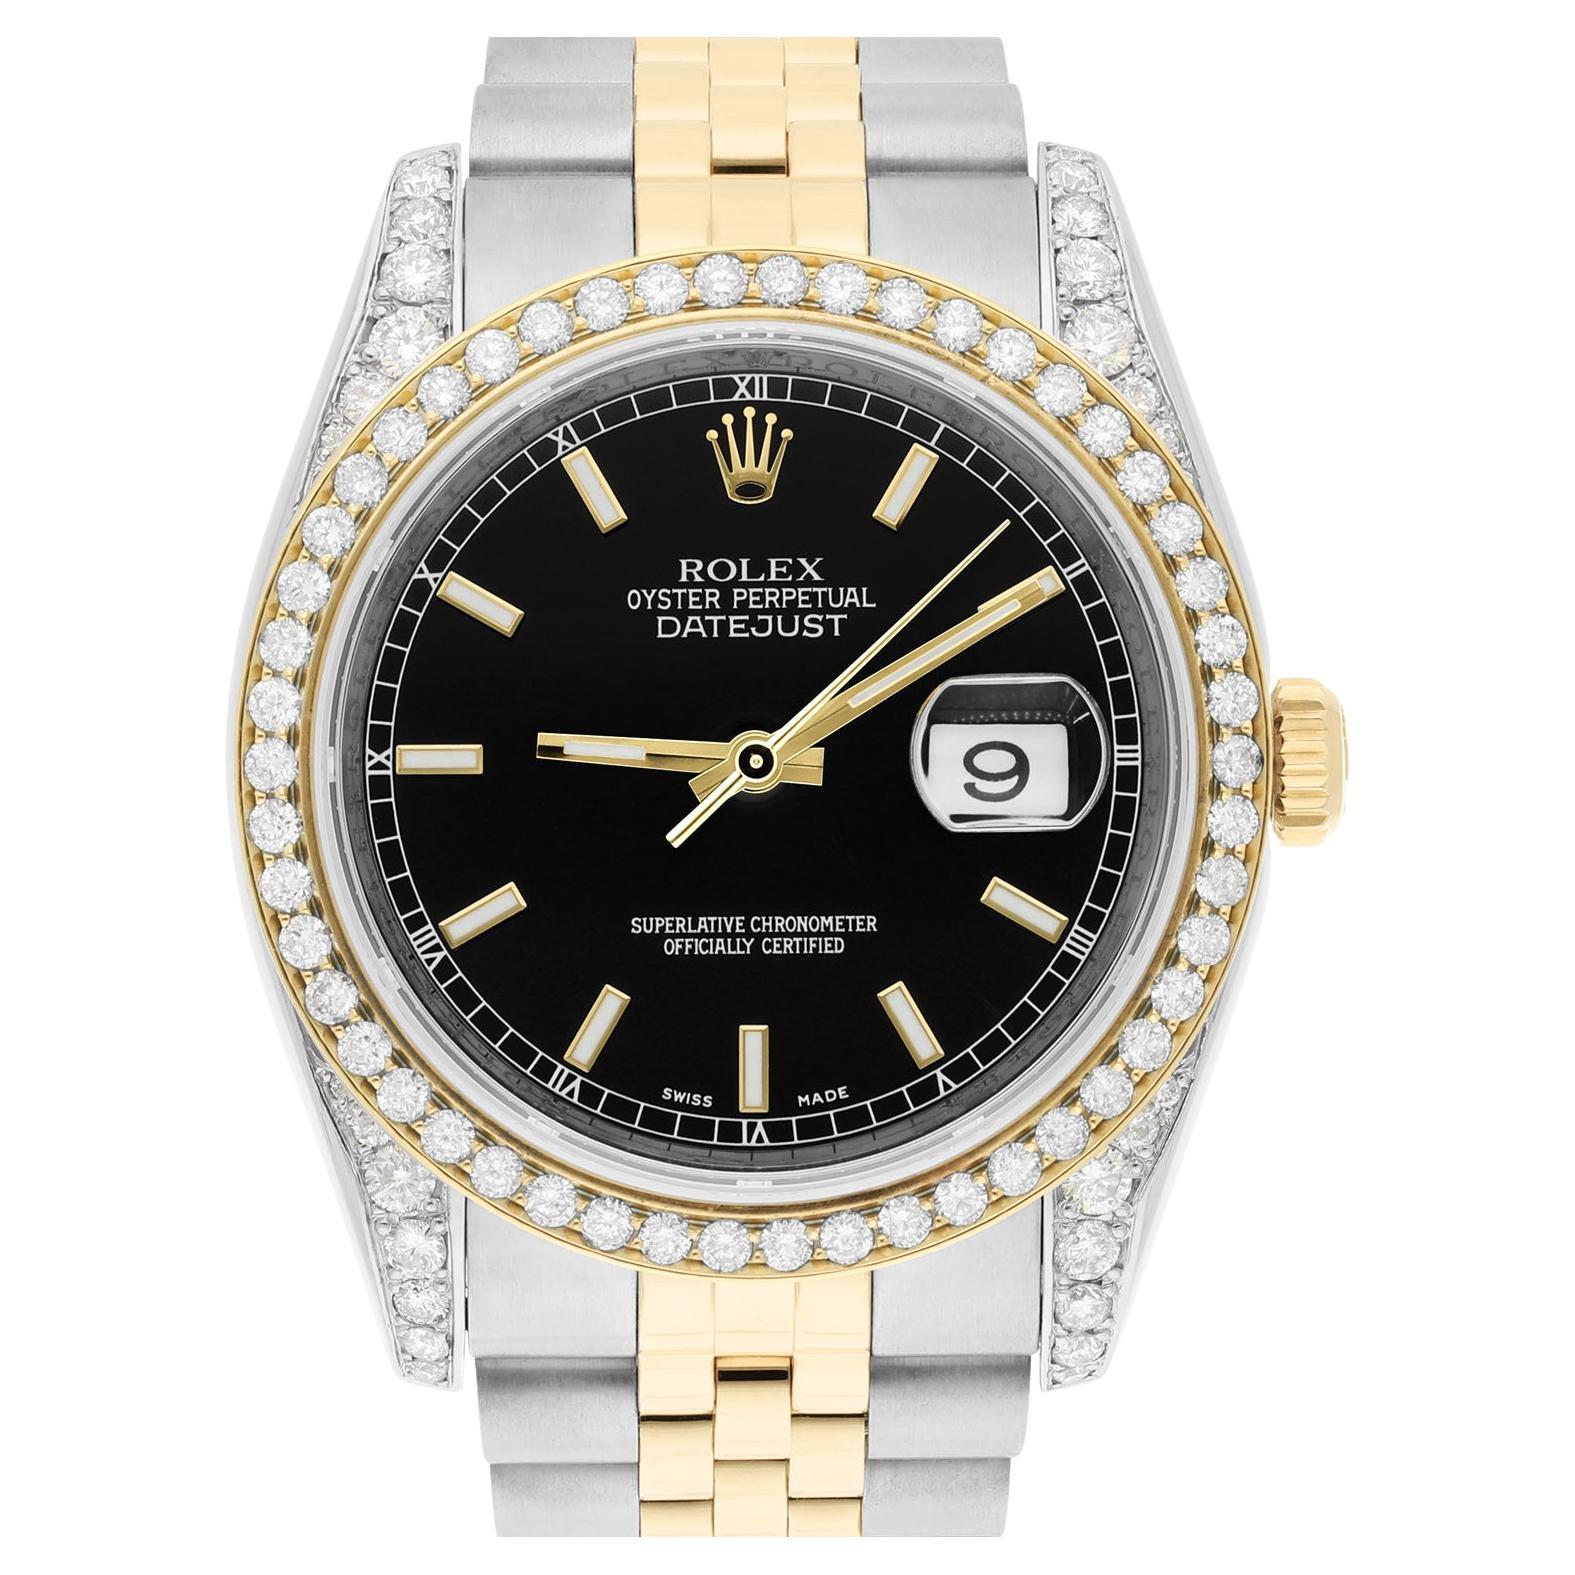 Rolex Datejust 36 Gold/Steel 116233 Black Index Dial Jubilee Band Diamond Watch For Sale